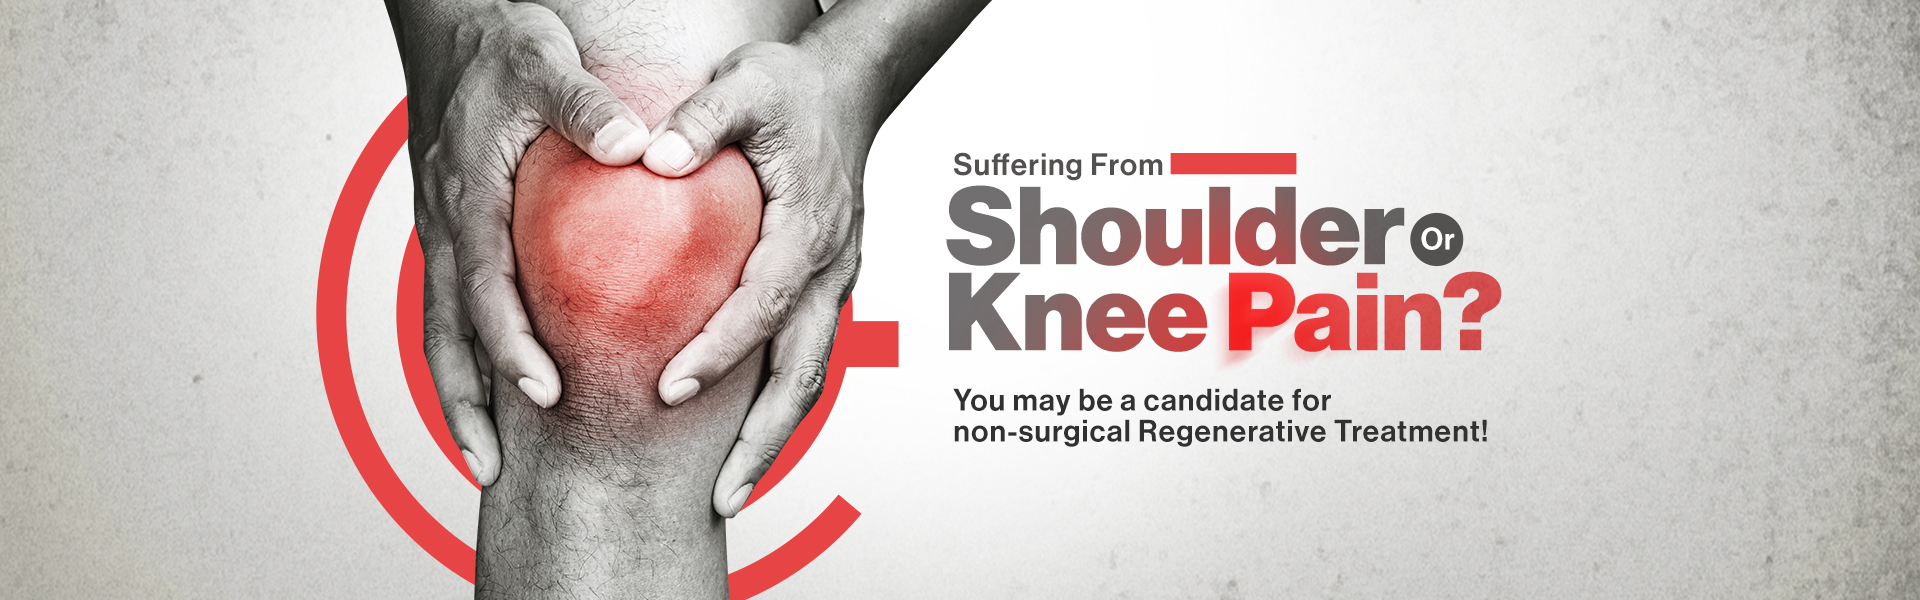 Suffering from Shoulder or knee pain? You may be a candidate for non-surgical regenerative treatment